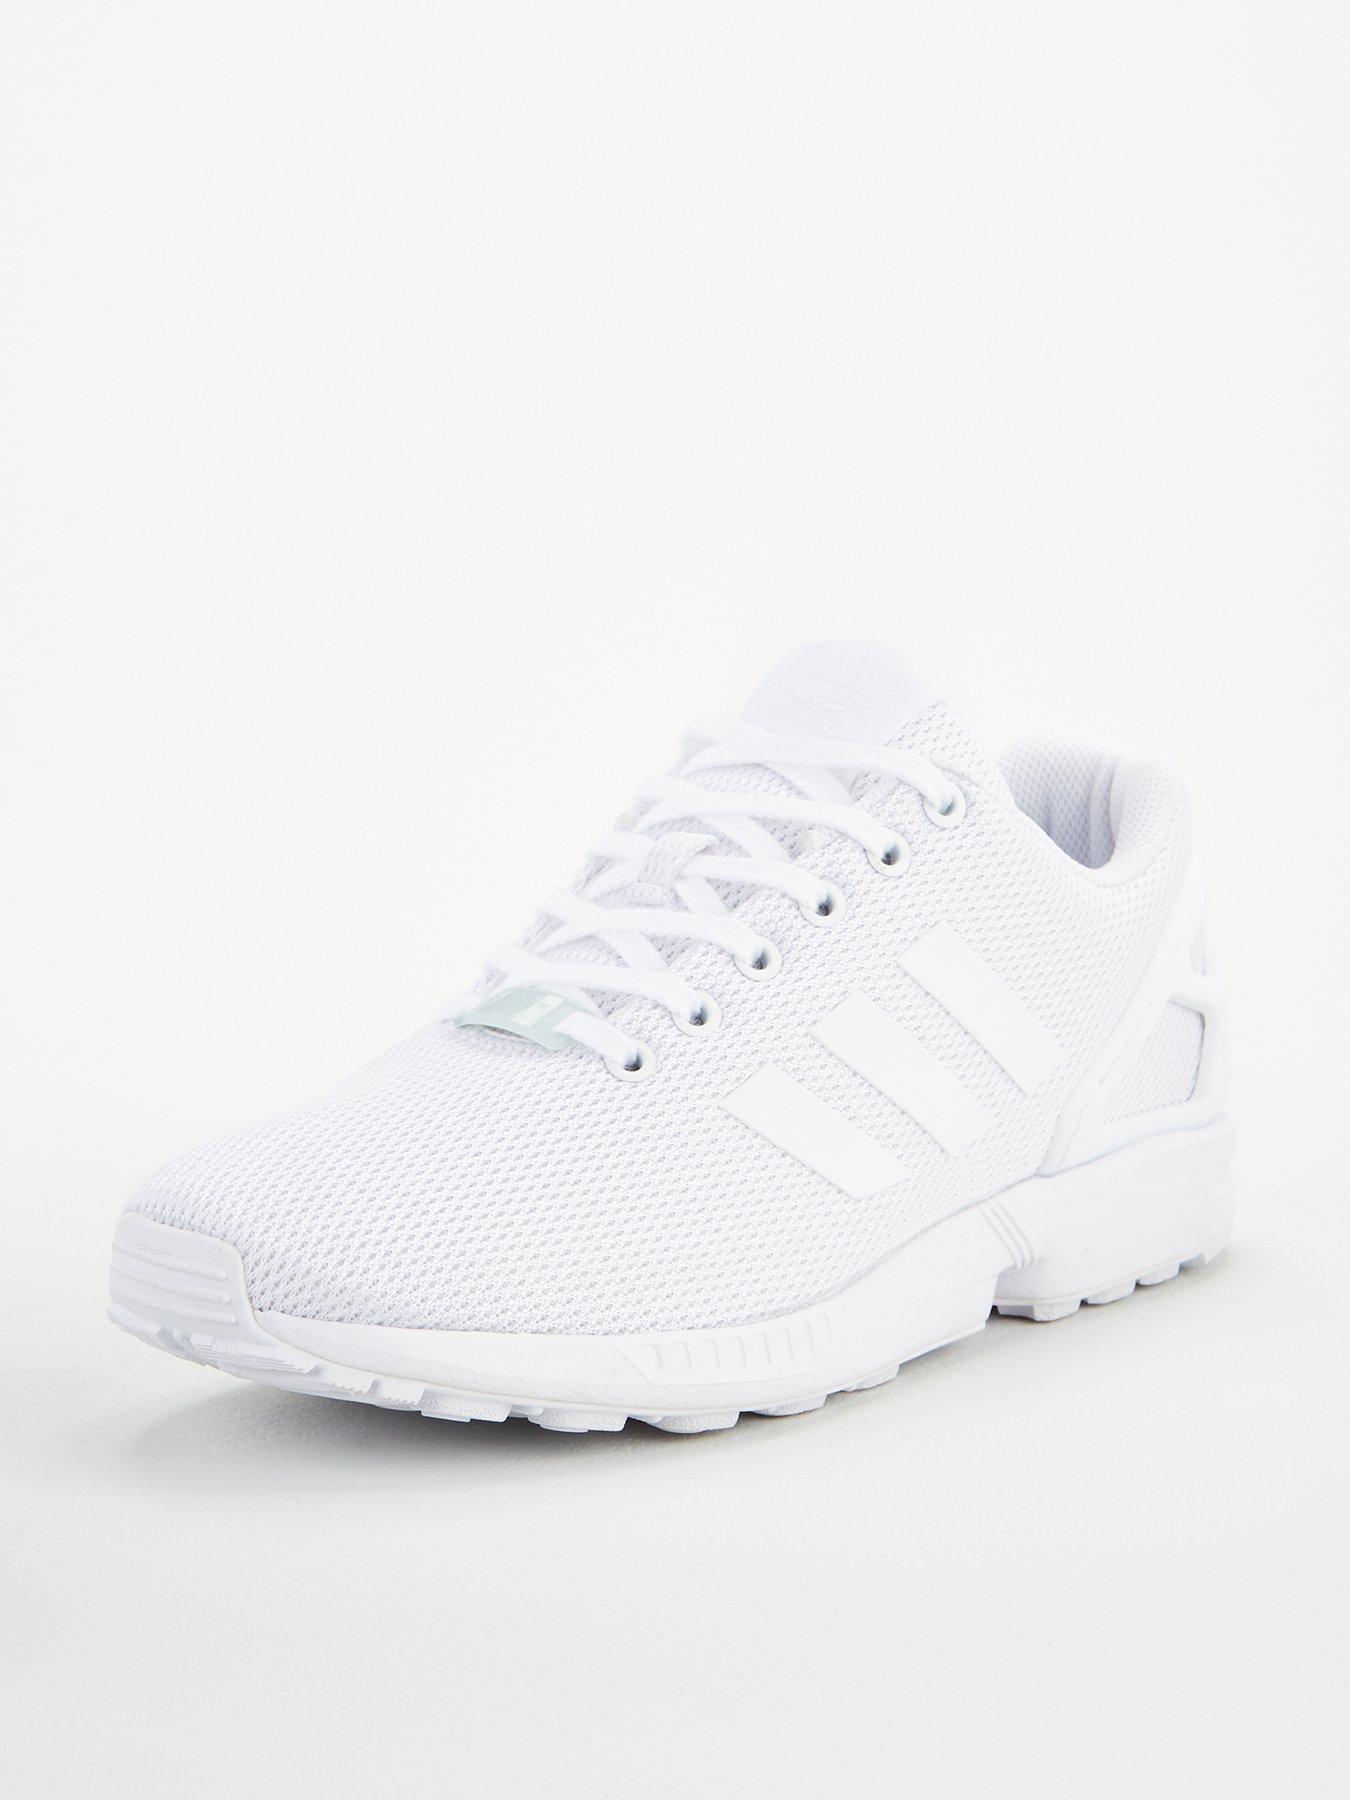 mens zx flux trainers